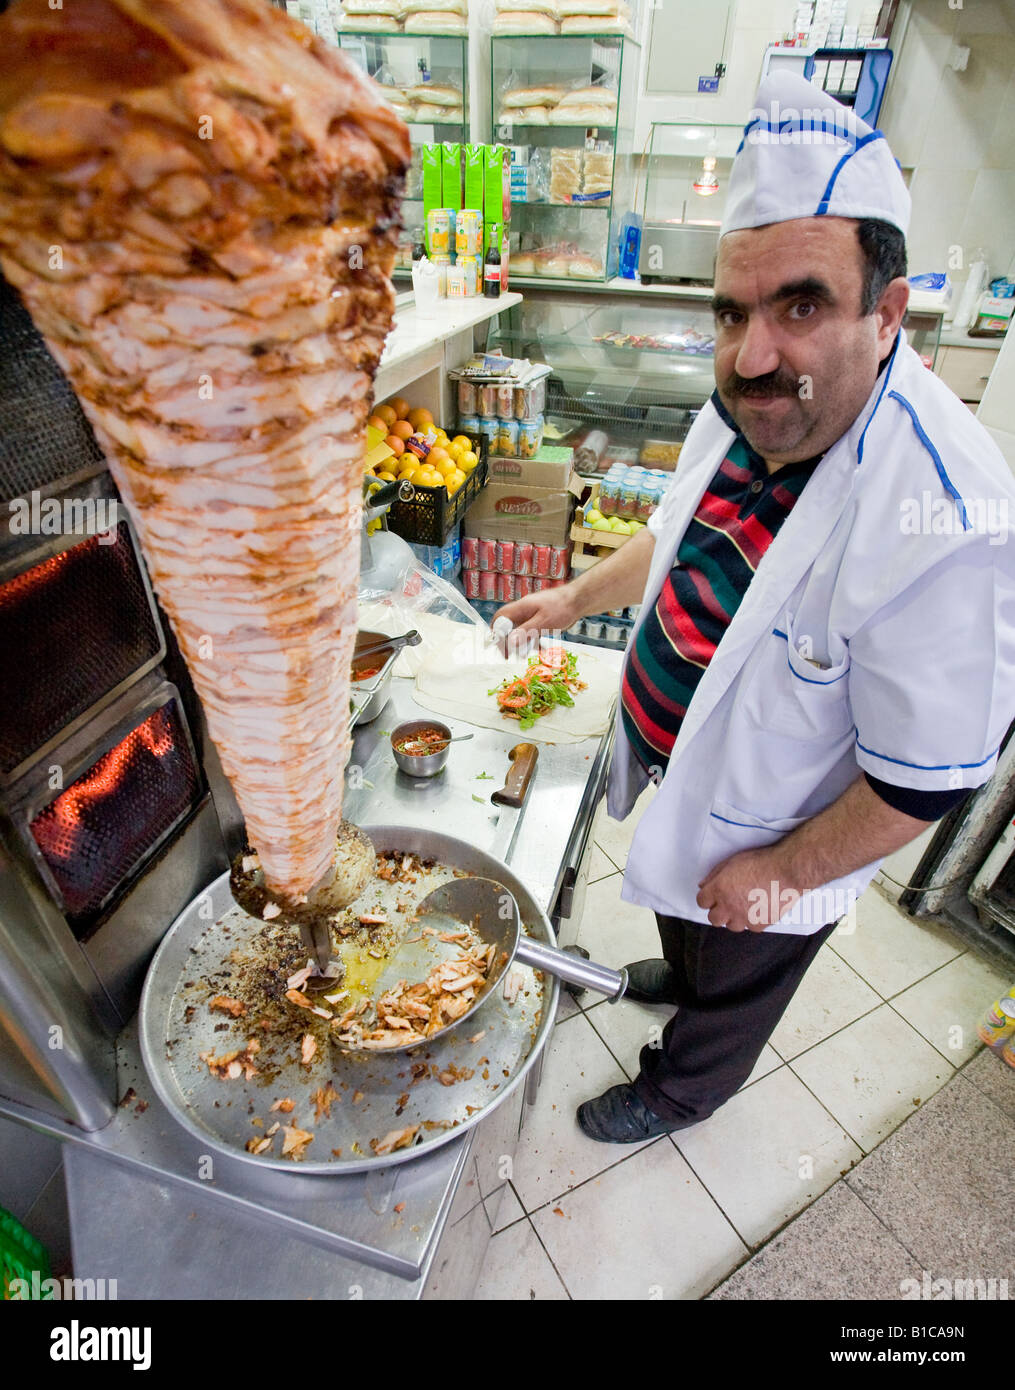 A little Salt Perhaps? A Donar being prepared with the meat in the foreground and a pida with salid in the background Stock Photo